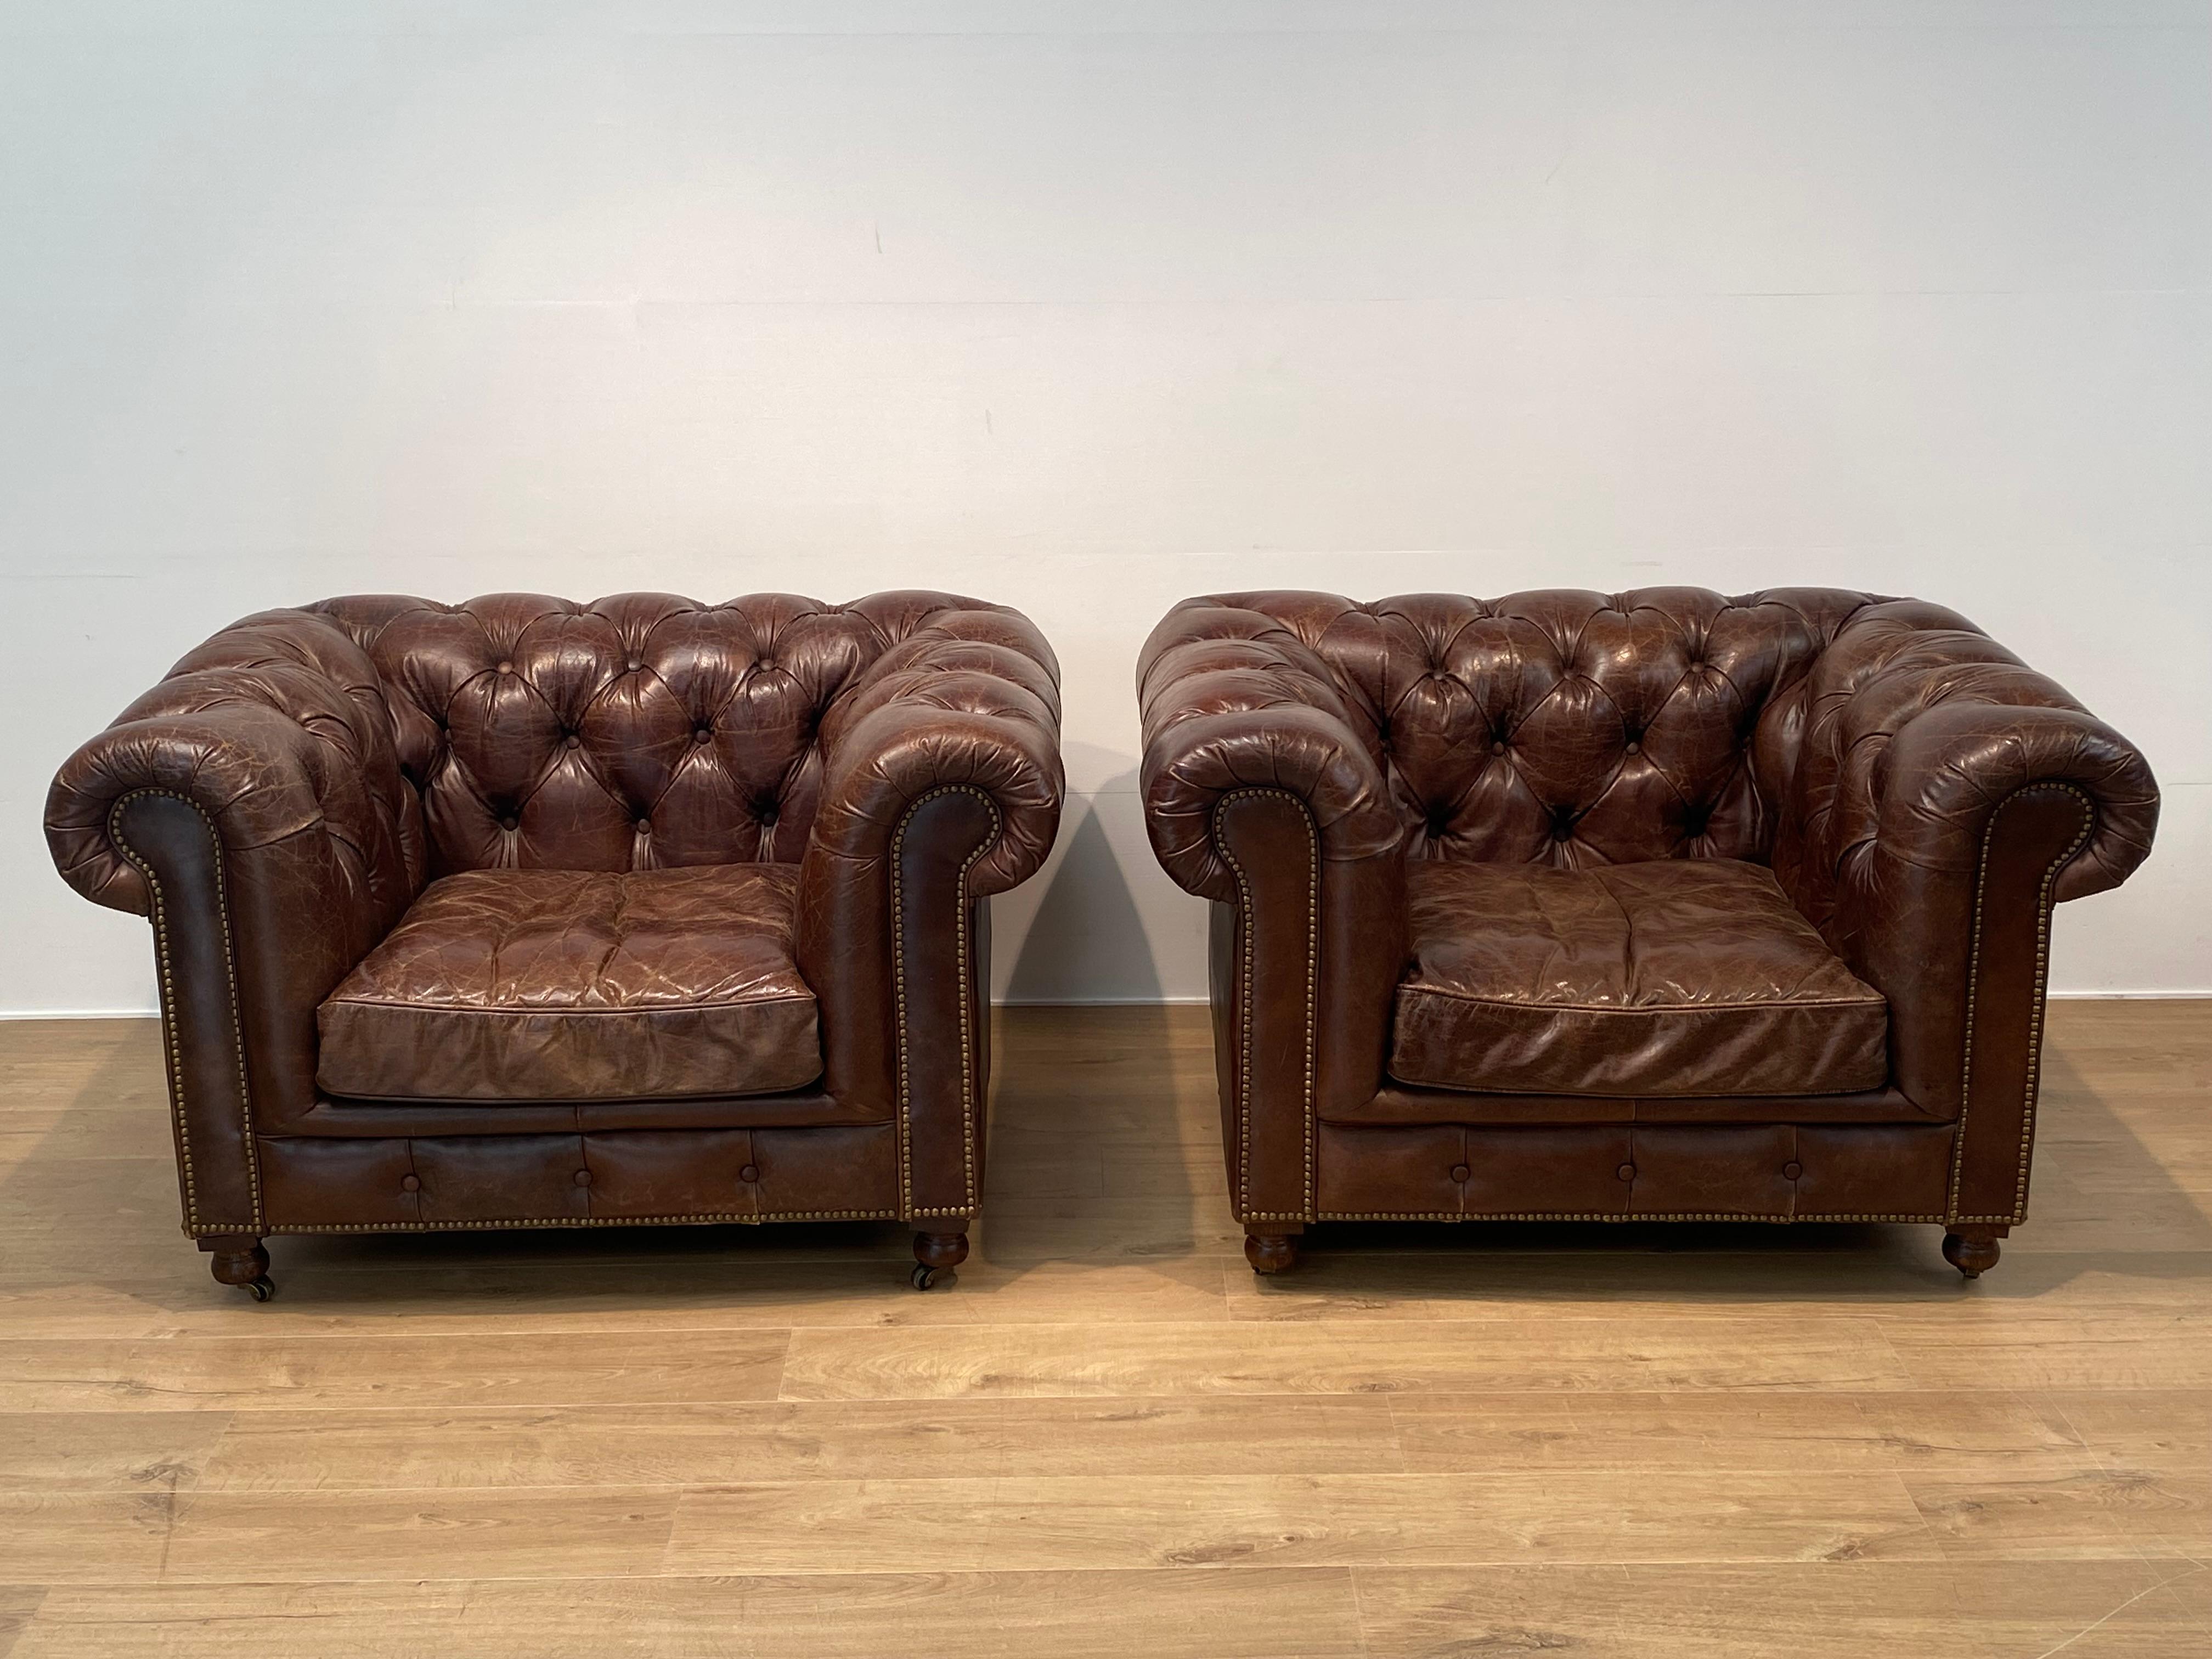 Patinated Pair of Leather Chesterfield Chairs For Sale